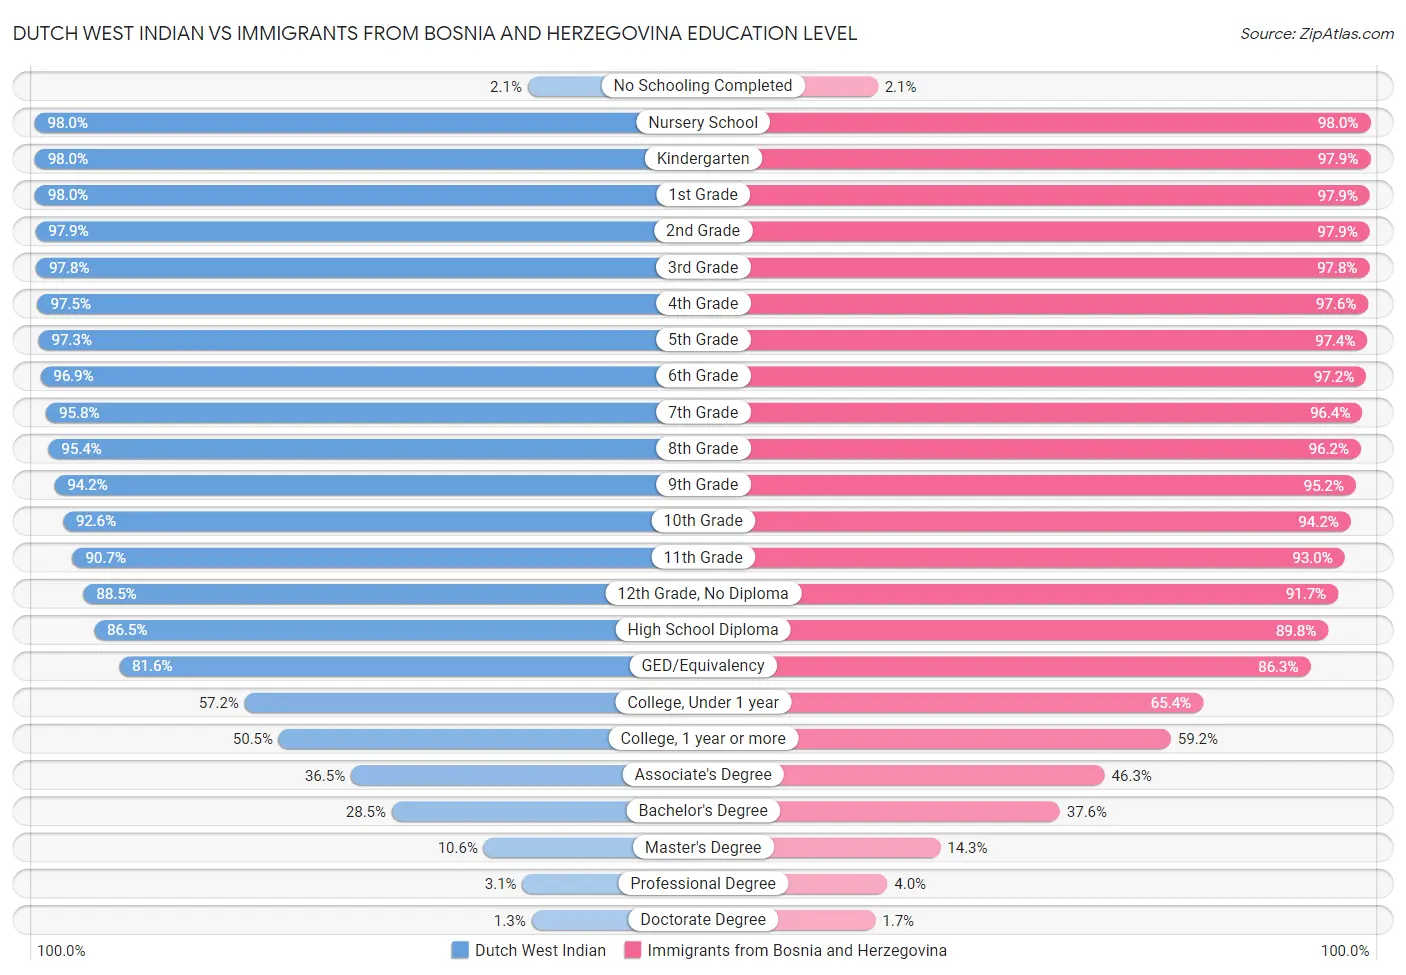 Dutch West Indian vs Immigrants from Bosnia and Herzegovina Education Level